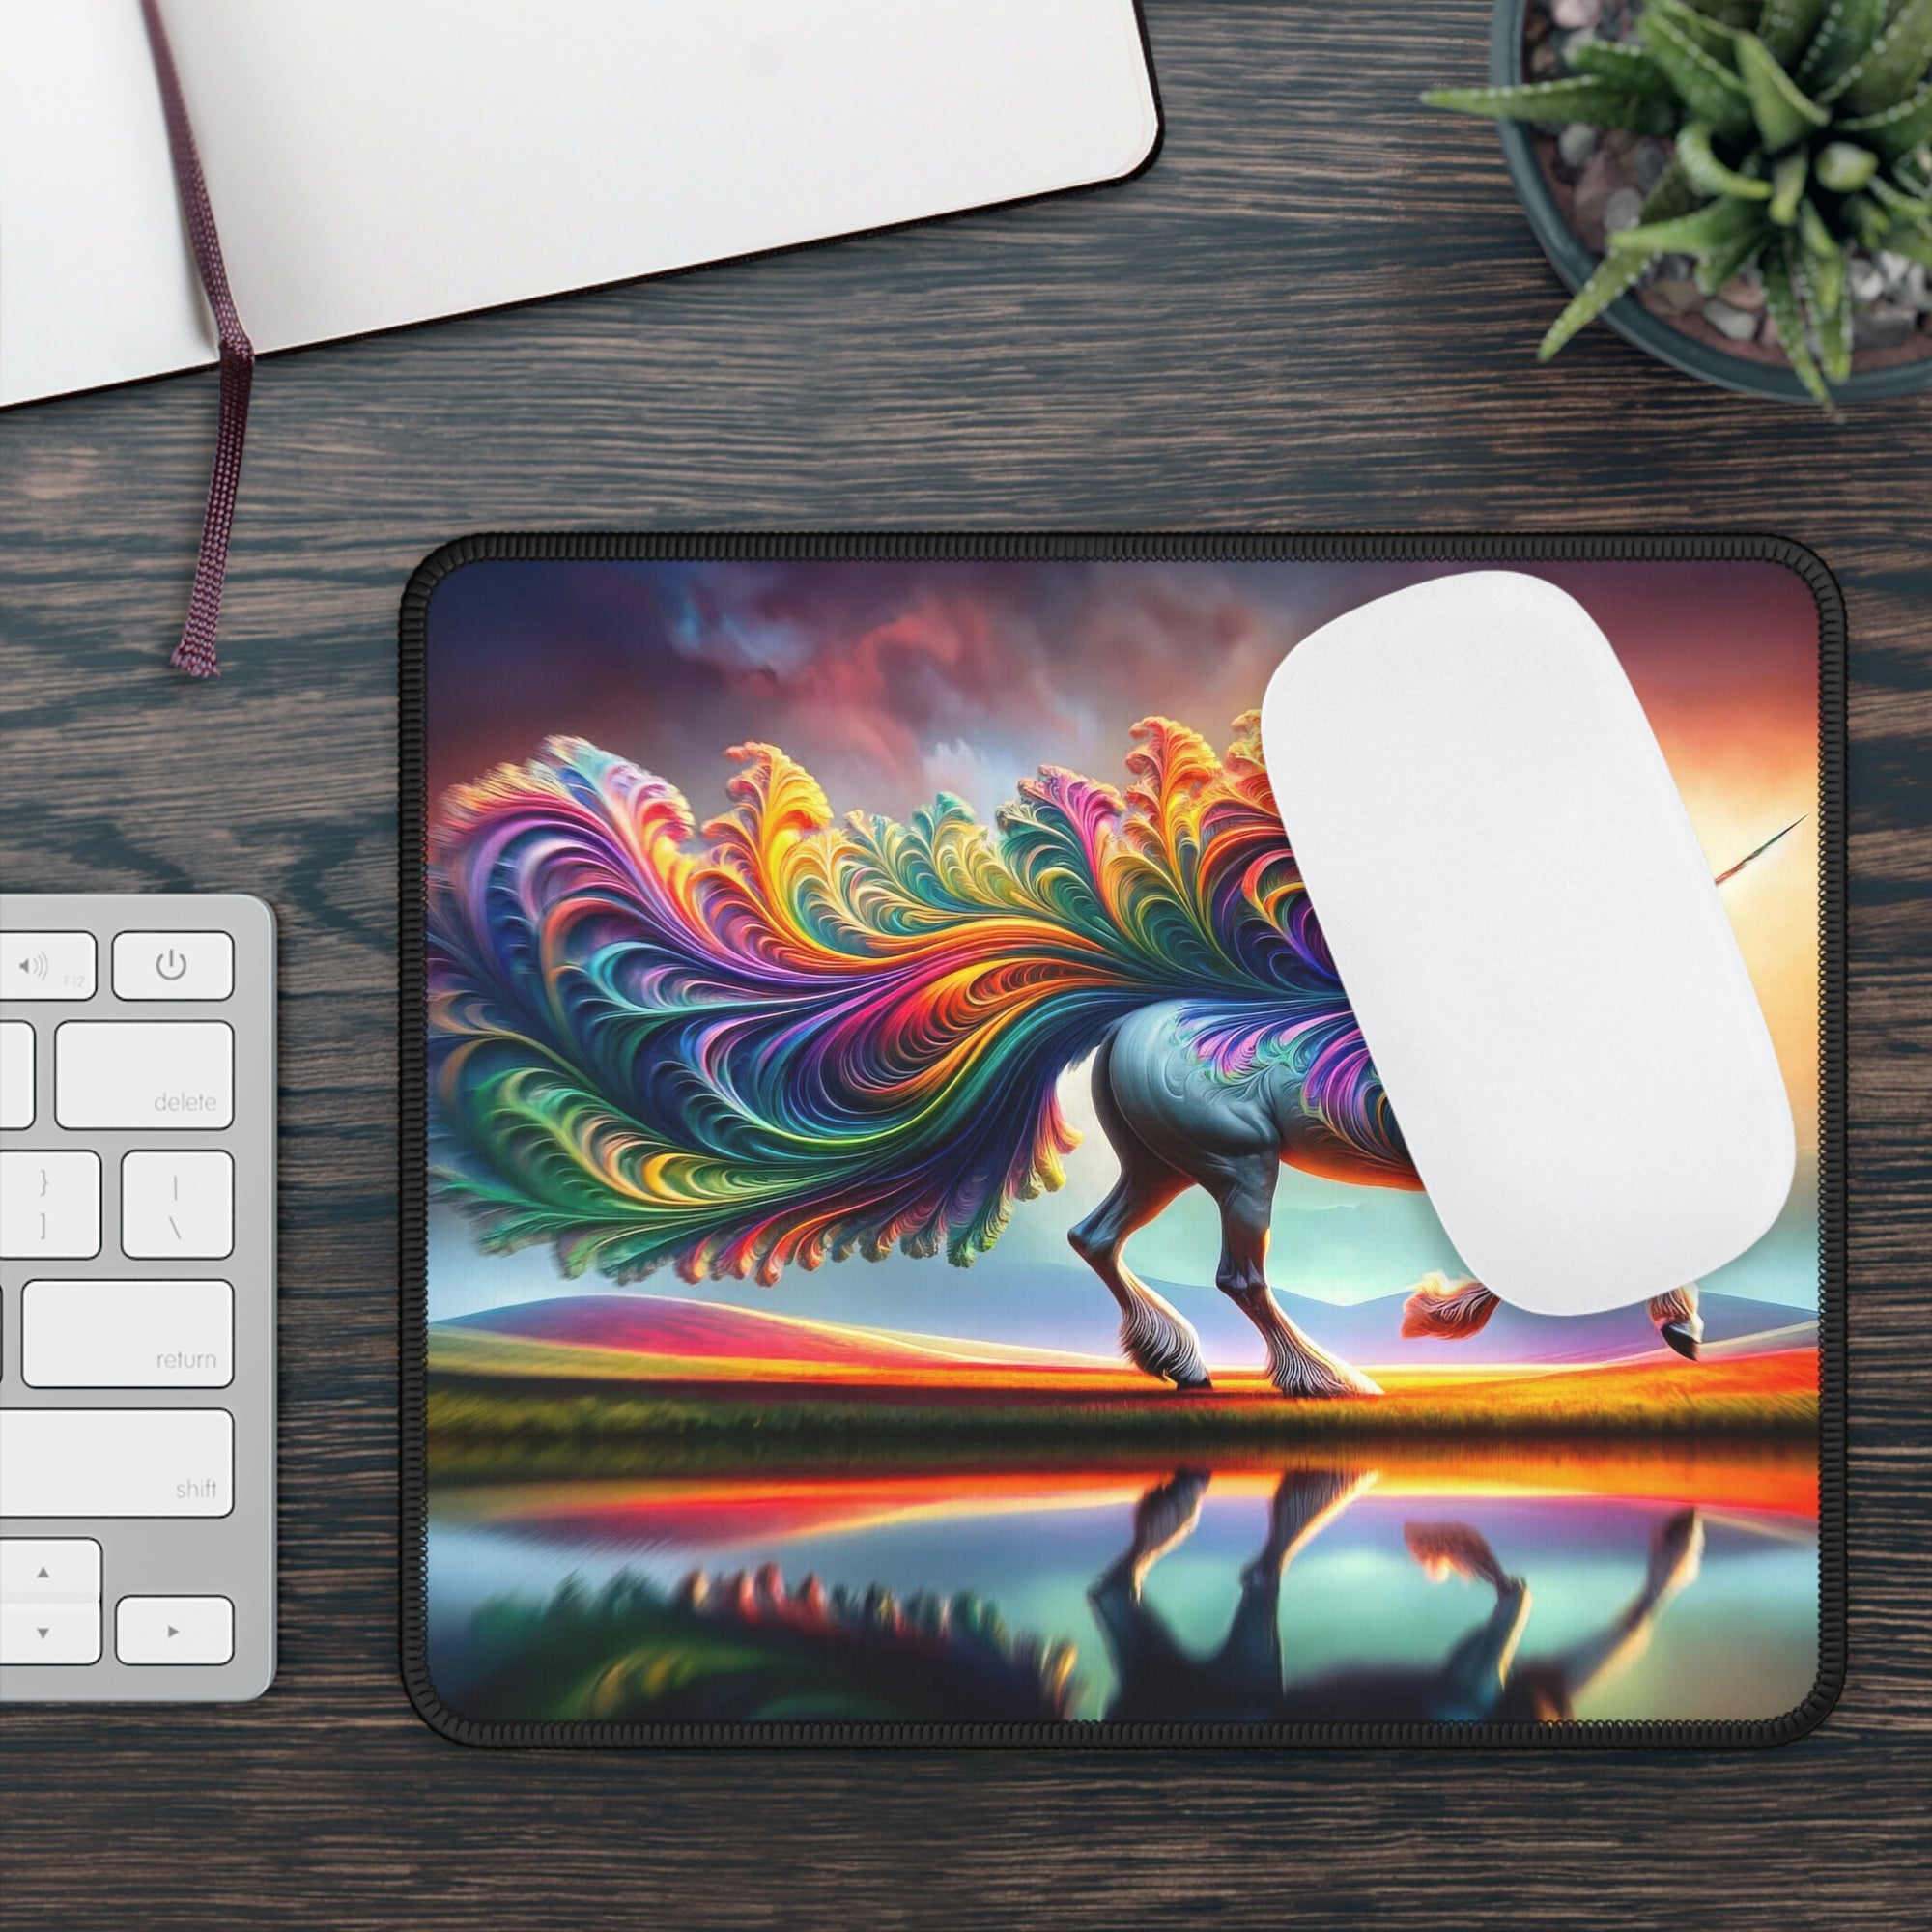 Spectrum Strider Gaming Mouse Pad